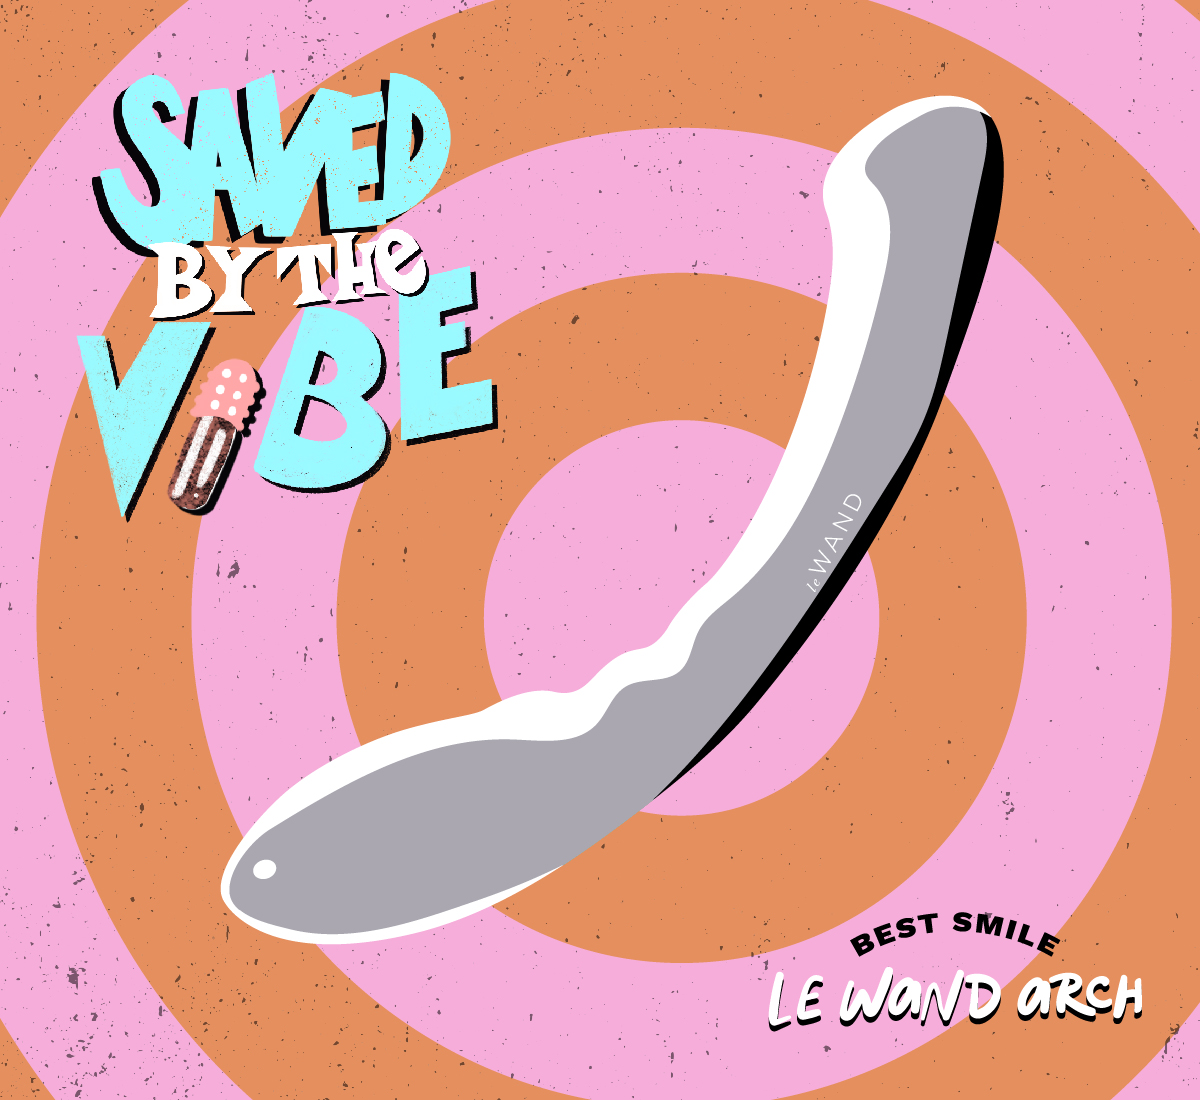 saved-by-the-vibe-le-wand-arch-02